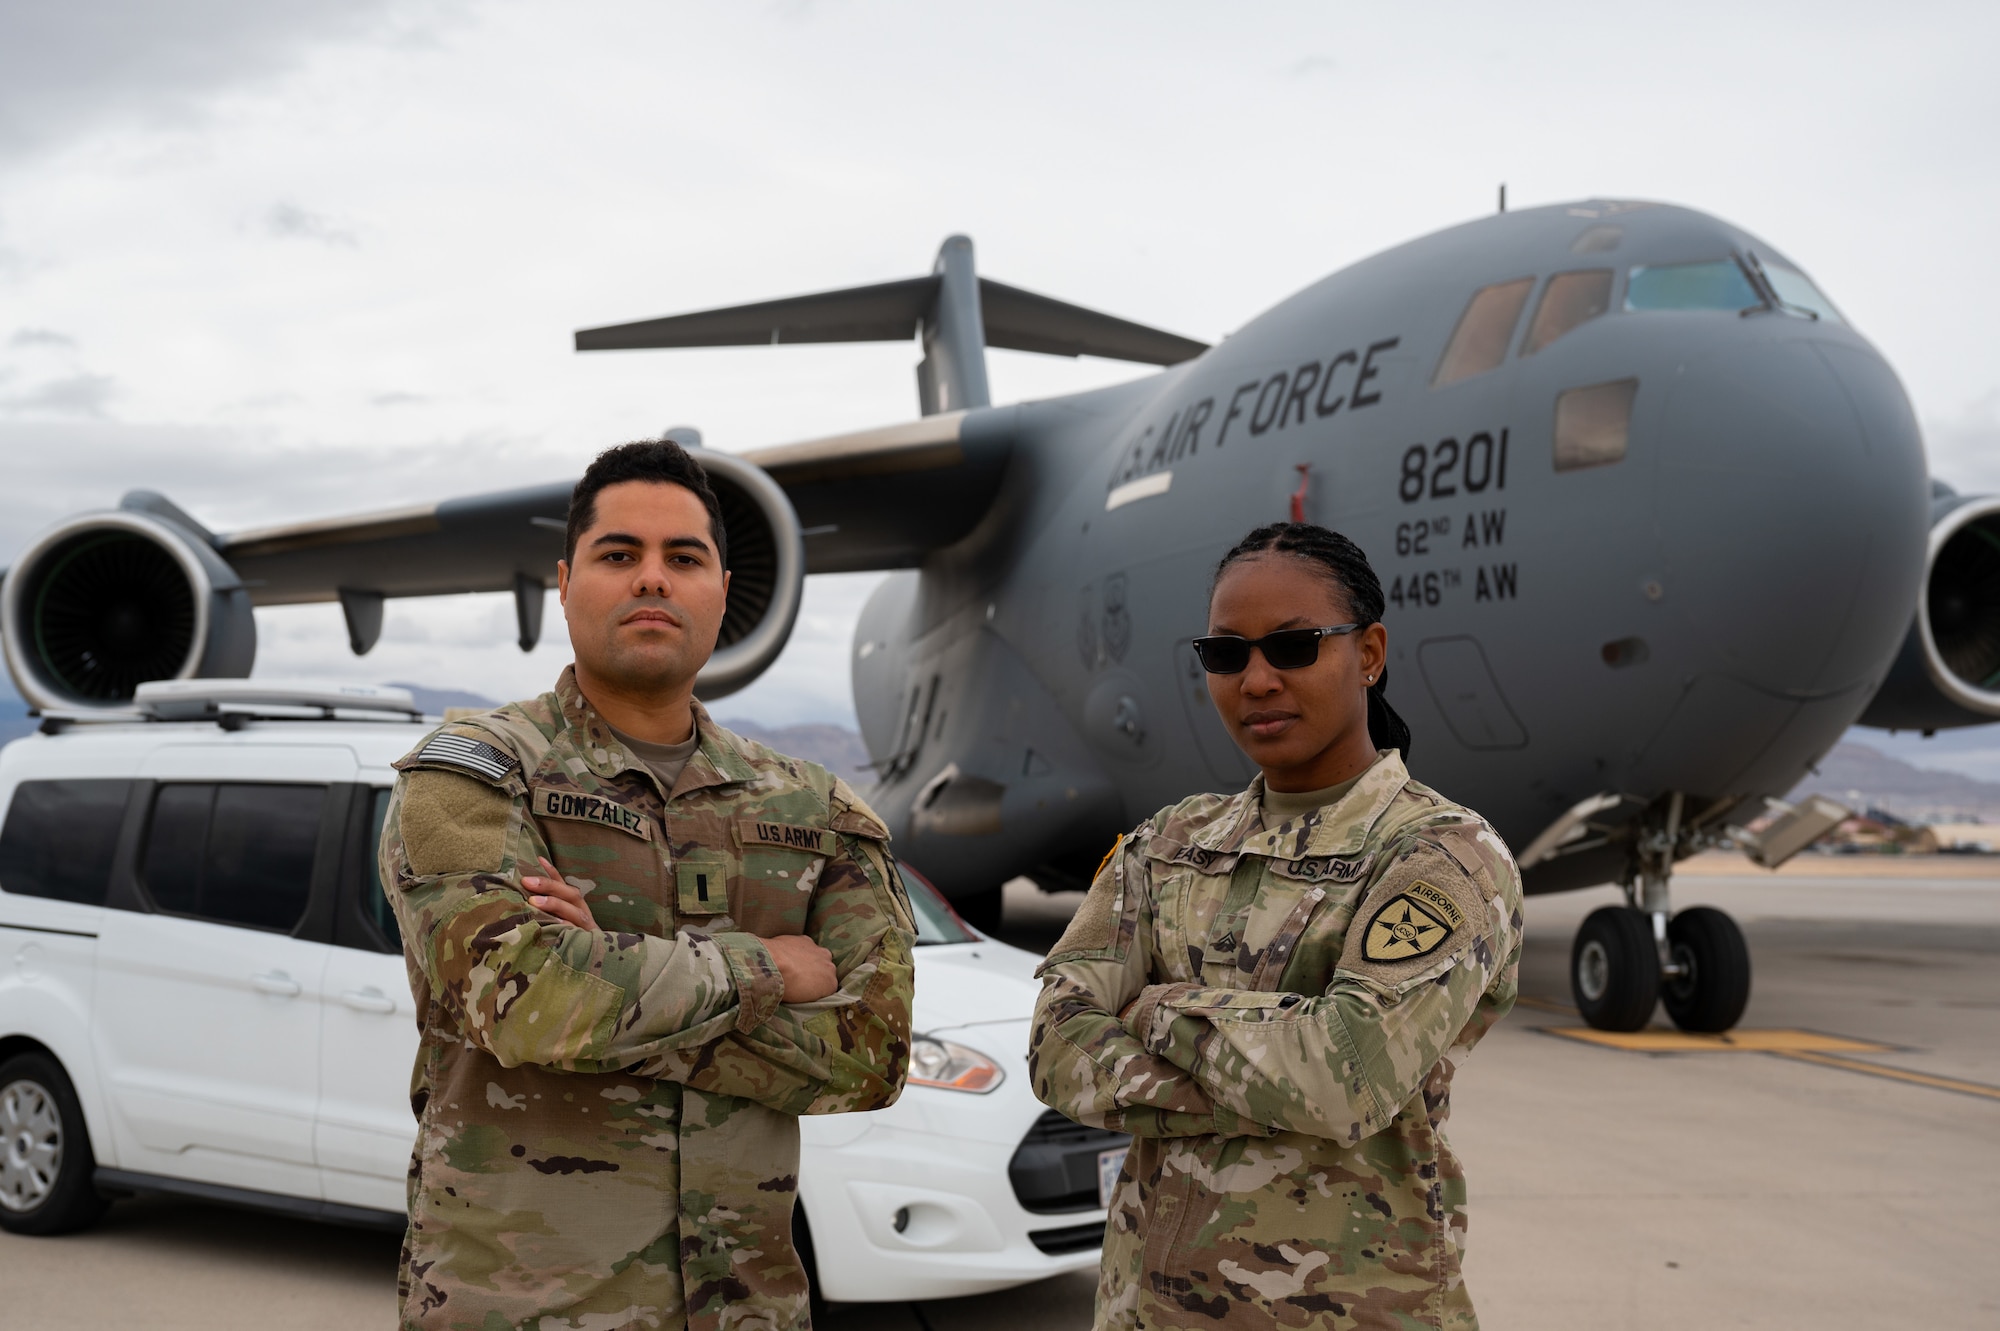 United States Army 1st Lt. Erickson Gonzalez, left, and Sgt. Monique Easy, Joint Communications Support Element, pose in front of the van and C-17 used in the Command and Control Element during Black Flag 23-1 operations at Nellis Air Force Base, Nevada, Feb. 23, 2023. This operation was accomplished by the combined effort between the C2 teams both on the ground and on the C-17 as they shared real time data to facilitate live operations. (U.S. Air Force photo by Airman 1st Class Josey Blades)